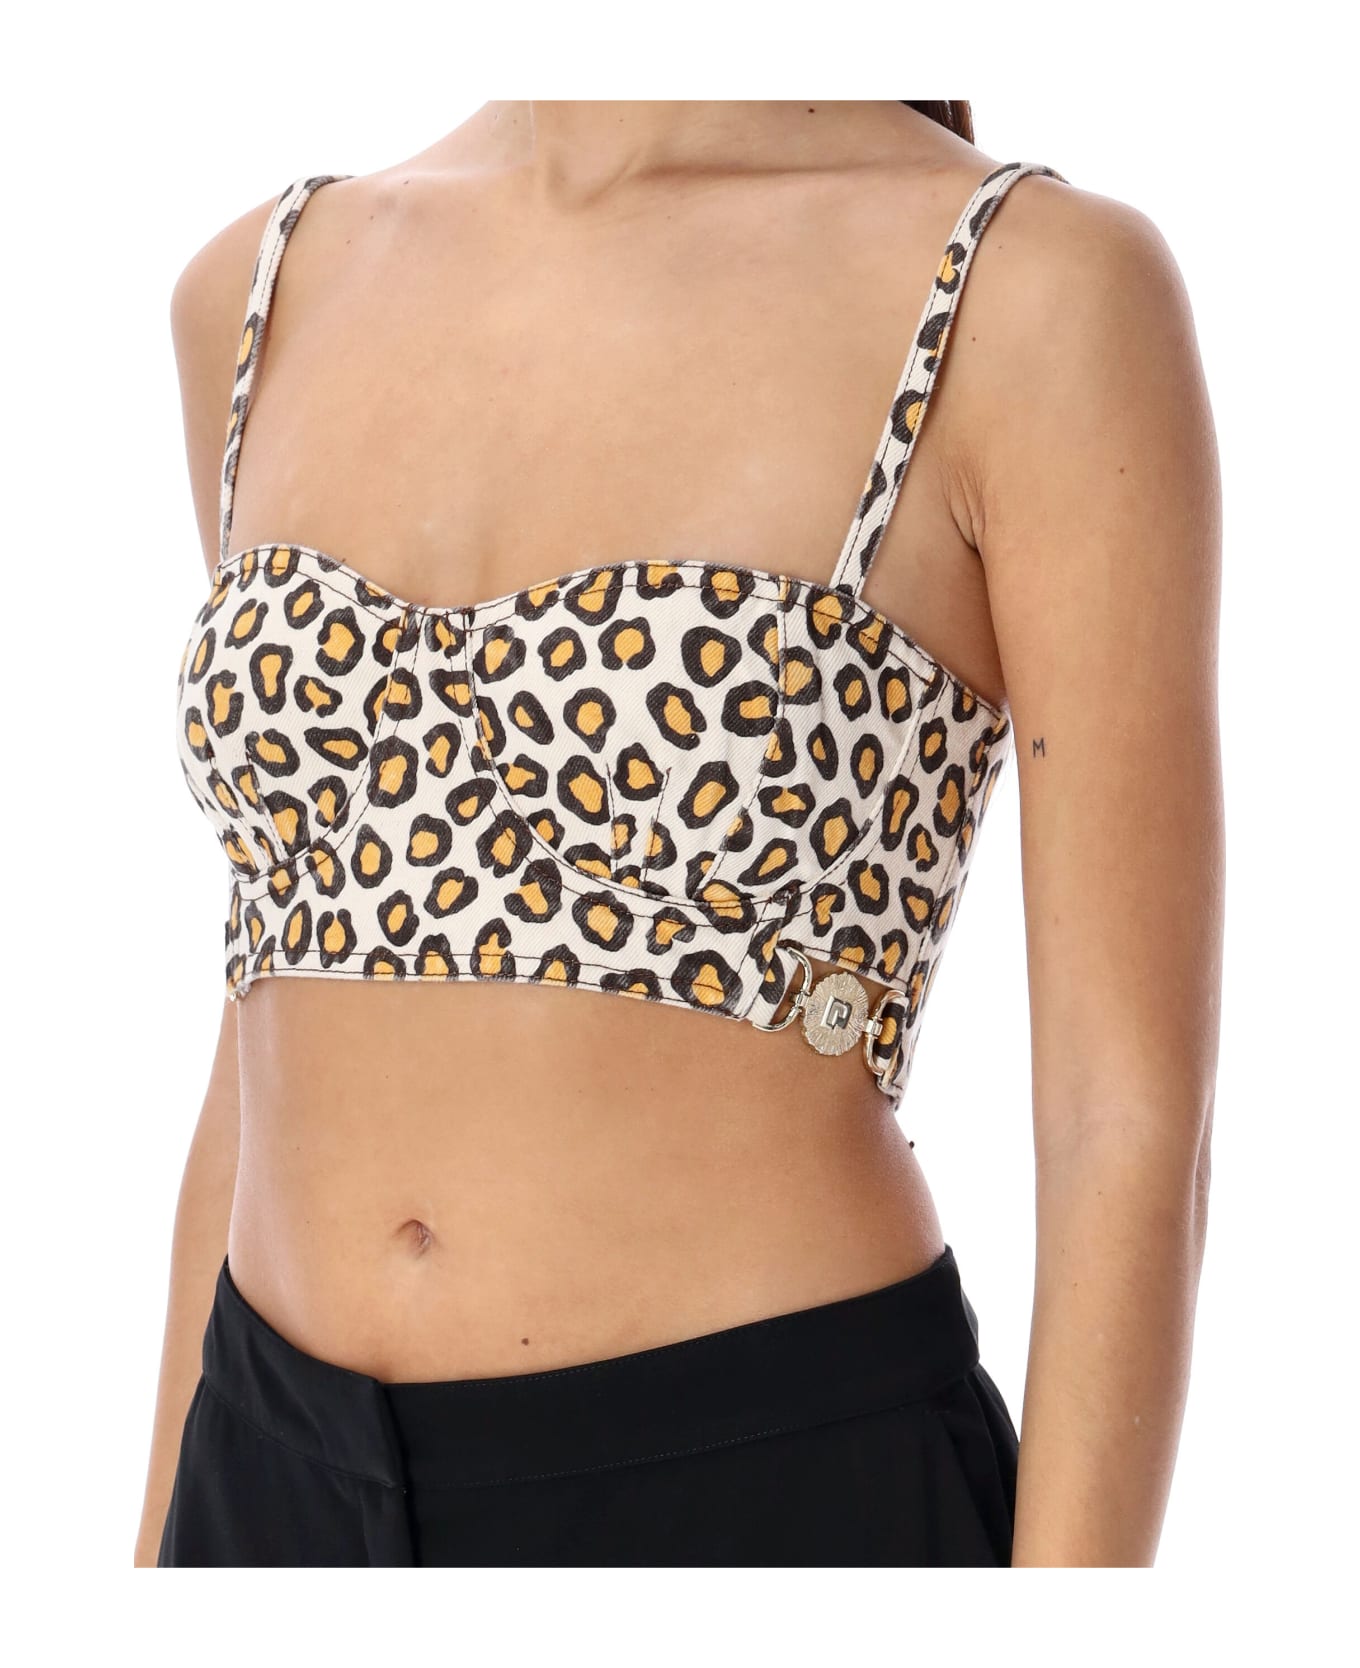 Paco Rabanne Leopard Printed Top - LEOPARD トップス